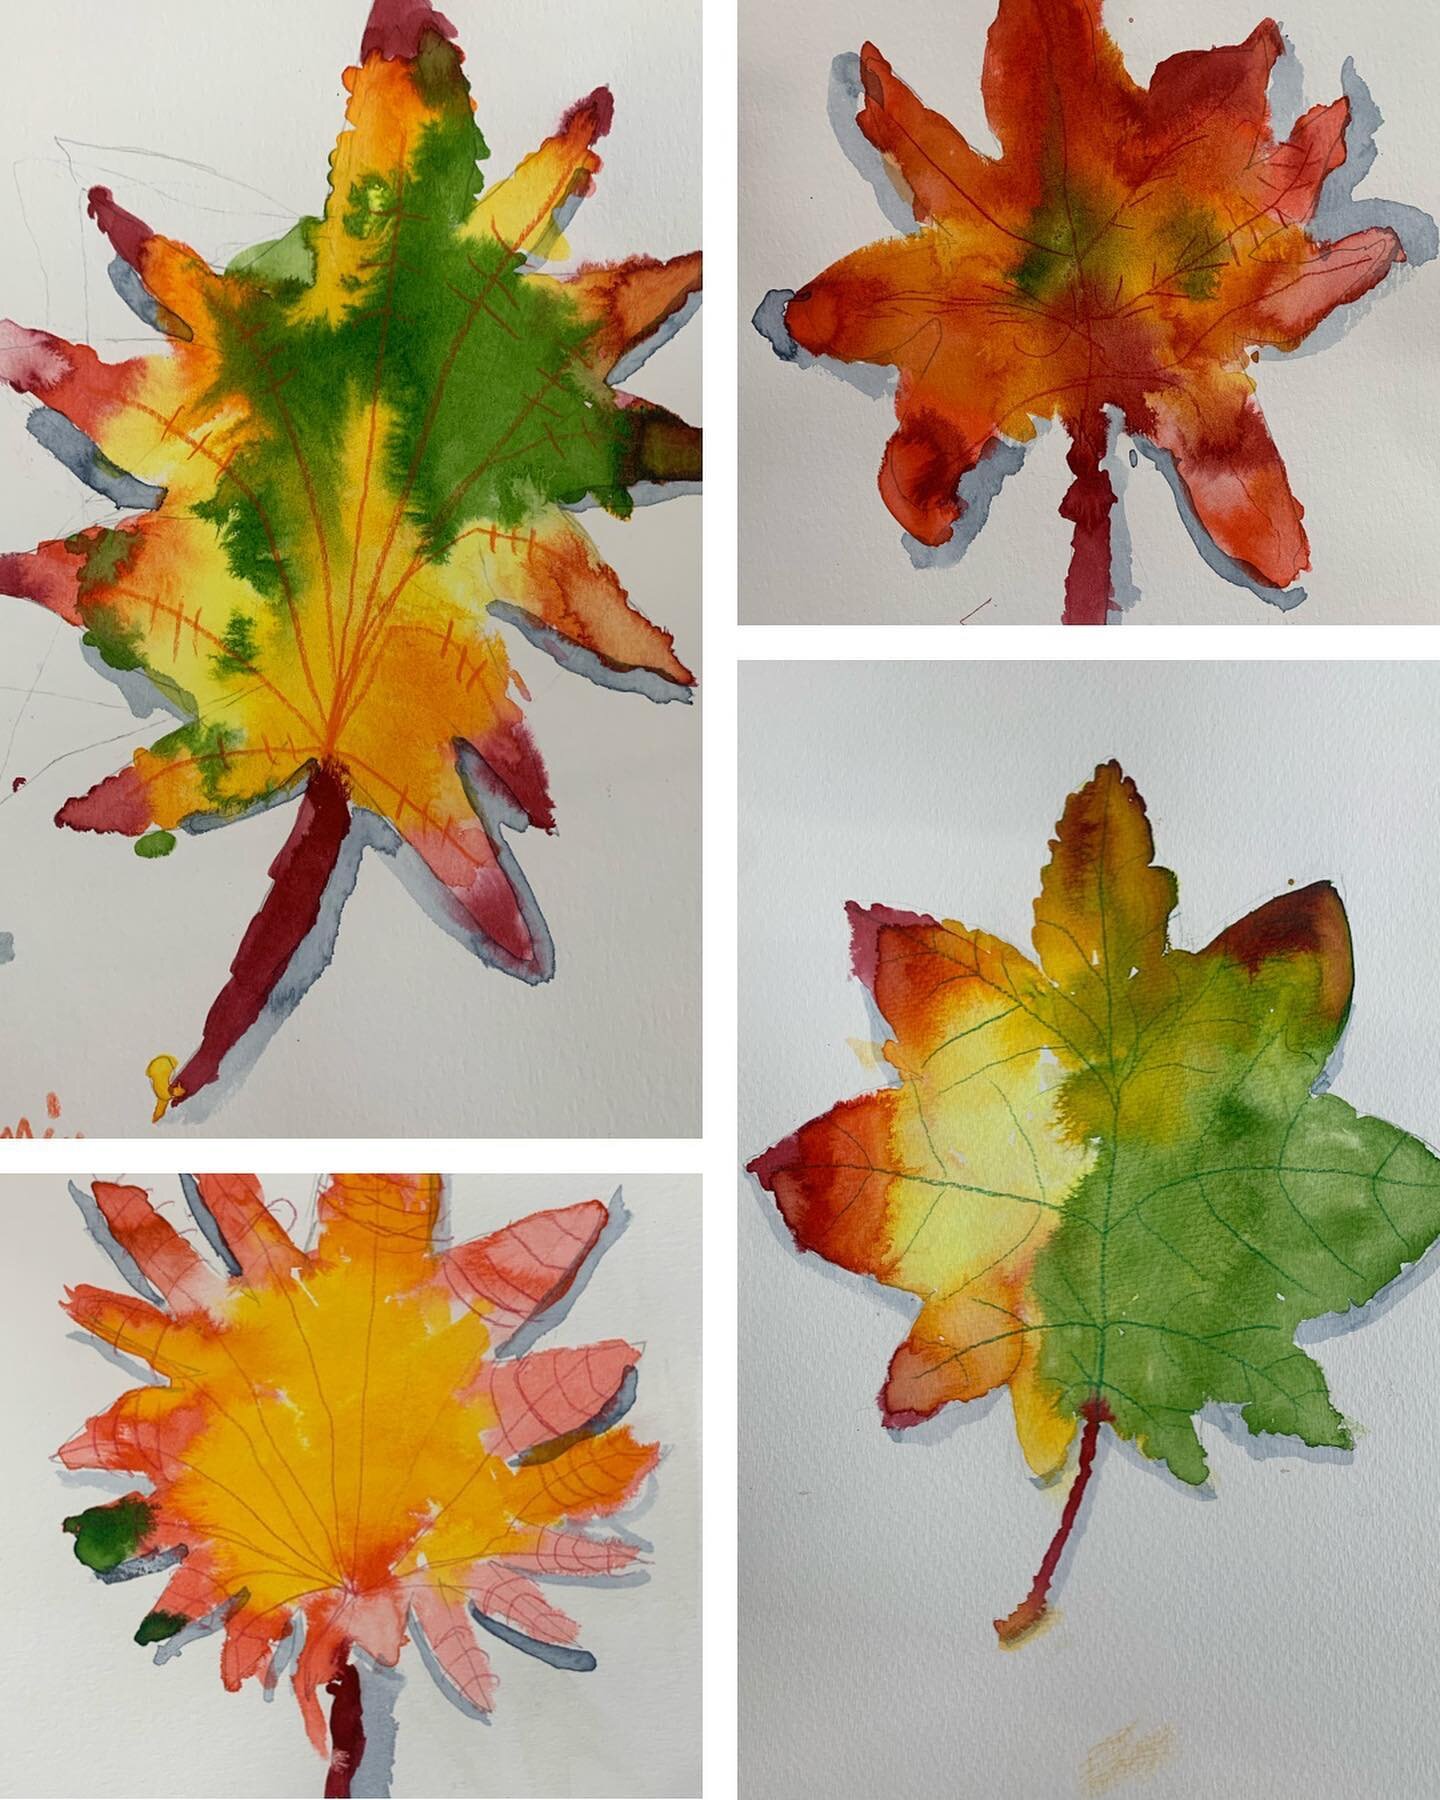 Some autumn projects at the art school. Happy fall everyone!
Colorful watercolor leaf studies by the 4,5, and 6 year olds. 
Jack-o-lantern stacks by the 6-8 year olds
Pinch pot pumpkin and gourd lanterns by the teens